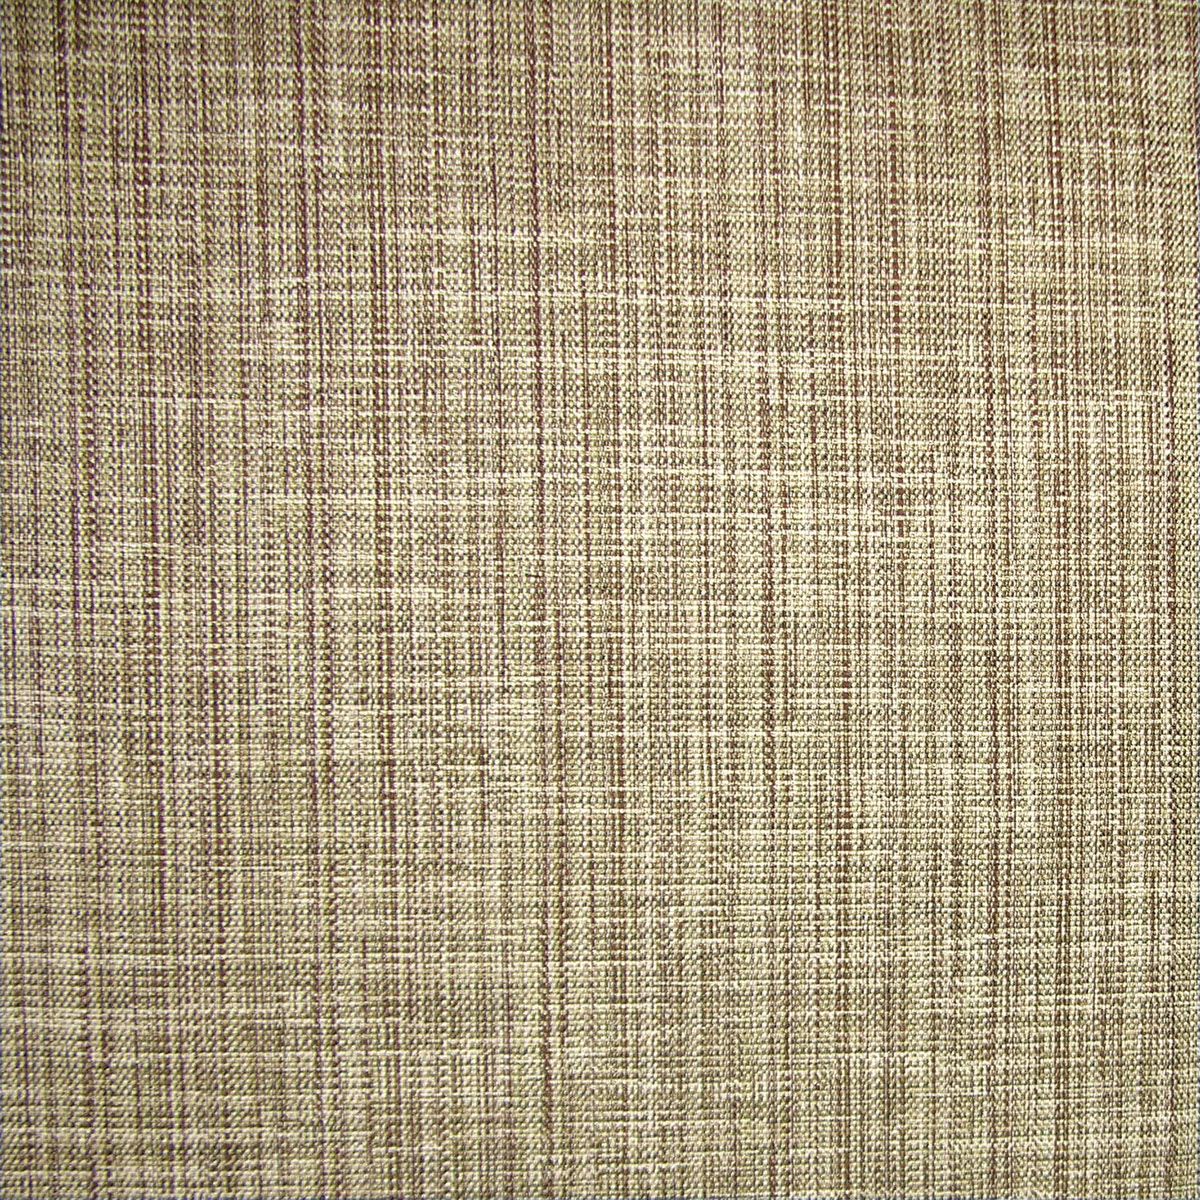 Lacerta Tweed fabric in chartreuse brown color - pattern number AL 00231992 - by Scalamandre in the Old World Weavers collection